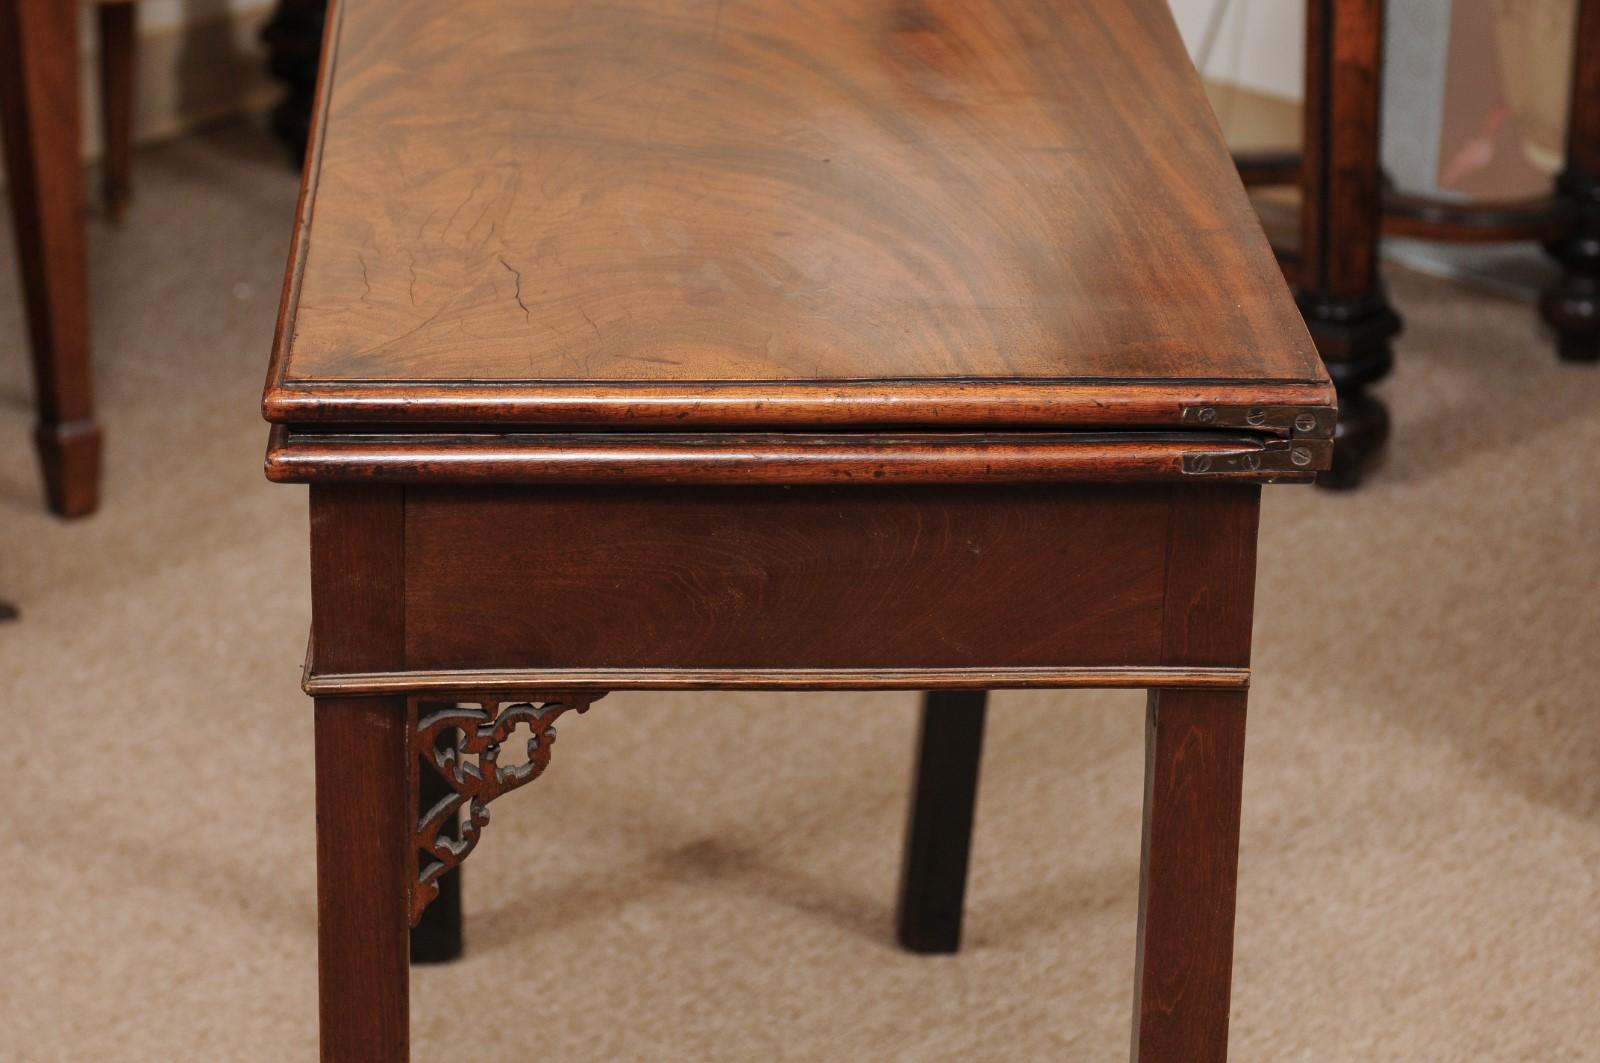 George II Period Flip-Top Tea Table with Fretwork, England ca. 1760 For Sale 4